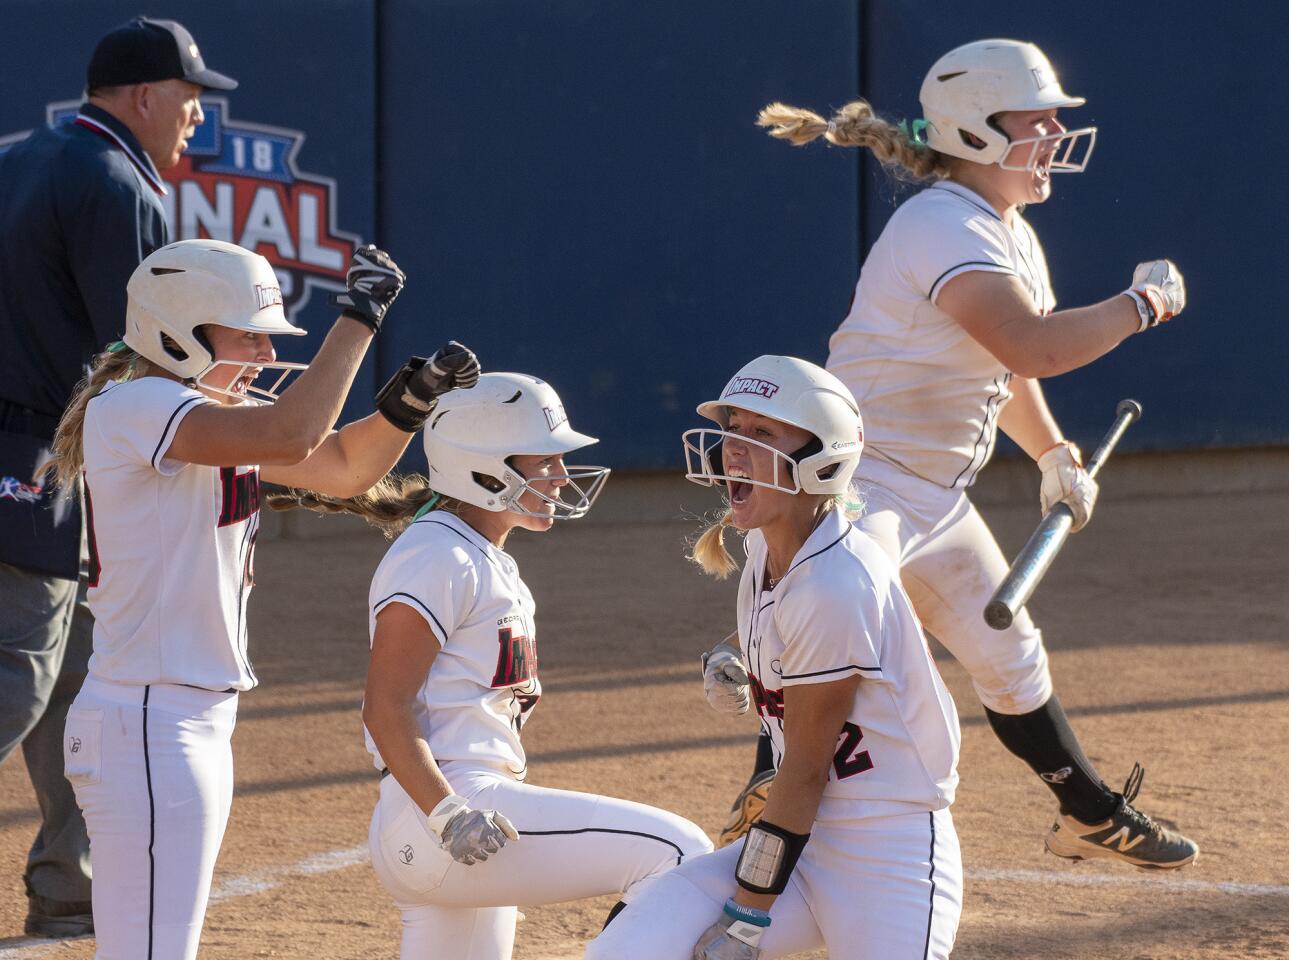 Georgia Impact players celebrate after Charla Echols hits a three run double in the sixth inning in the 18U Premier bracket championship game of the PGF Nationals on Friday, July 27.